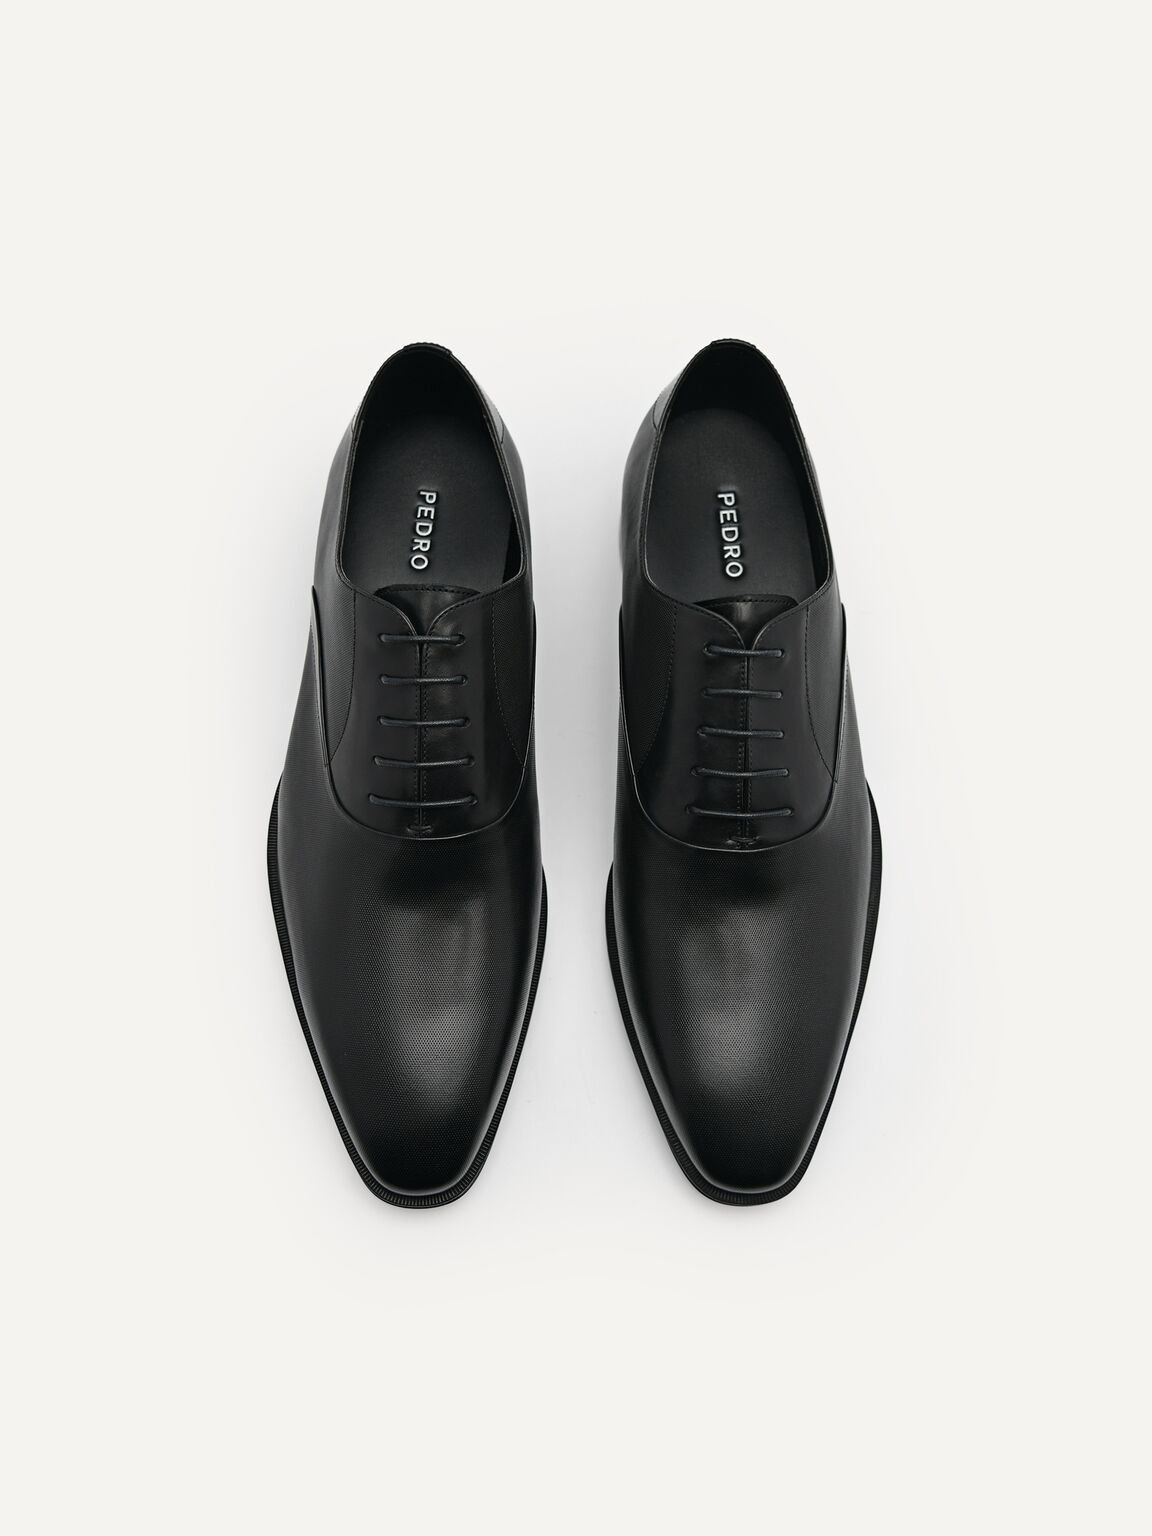 Holly Leather Oxford Shoes, Black, hi-res